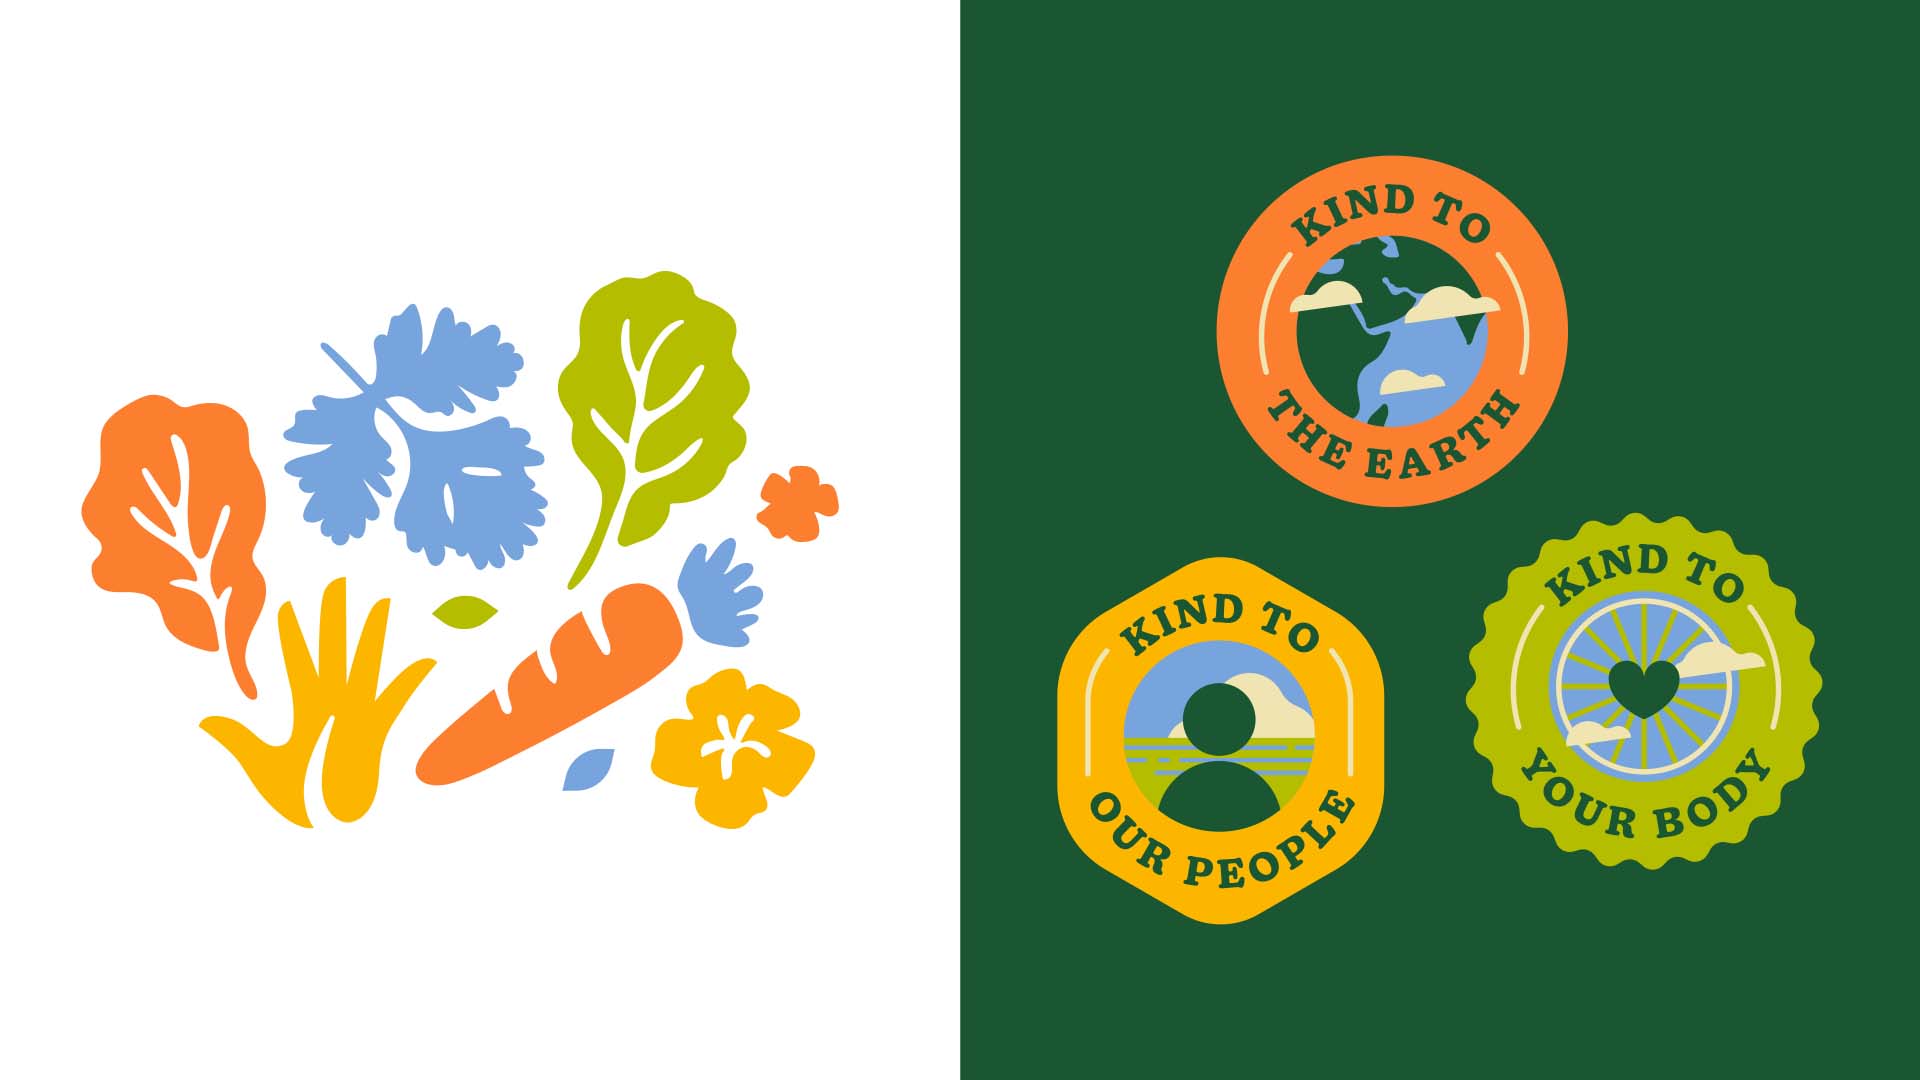 Colorful fruit and vegetable stamp illustrations and badge design for bidynamic farm and brand Ami Farms 